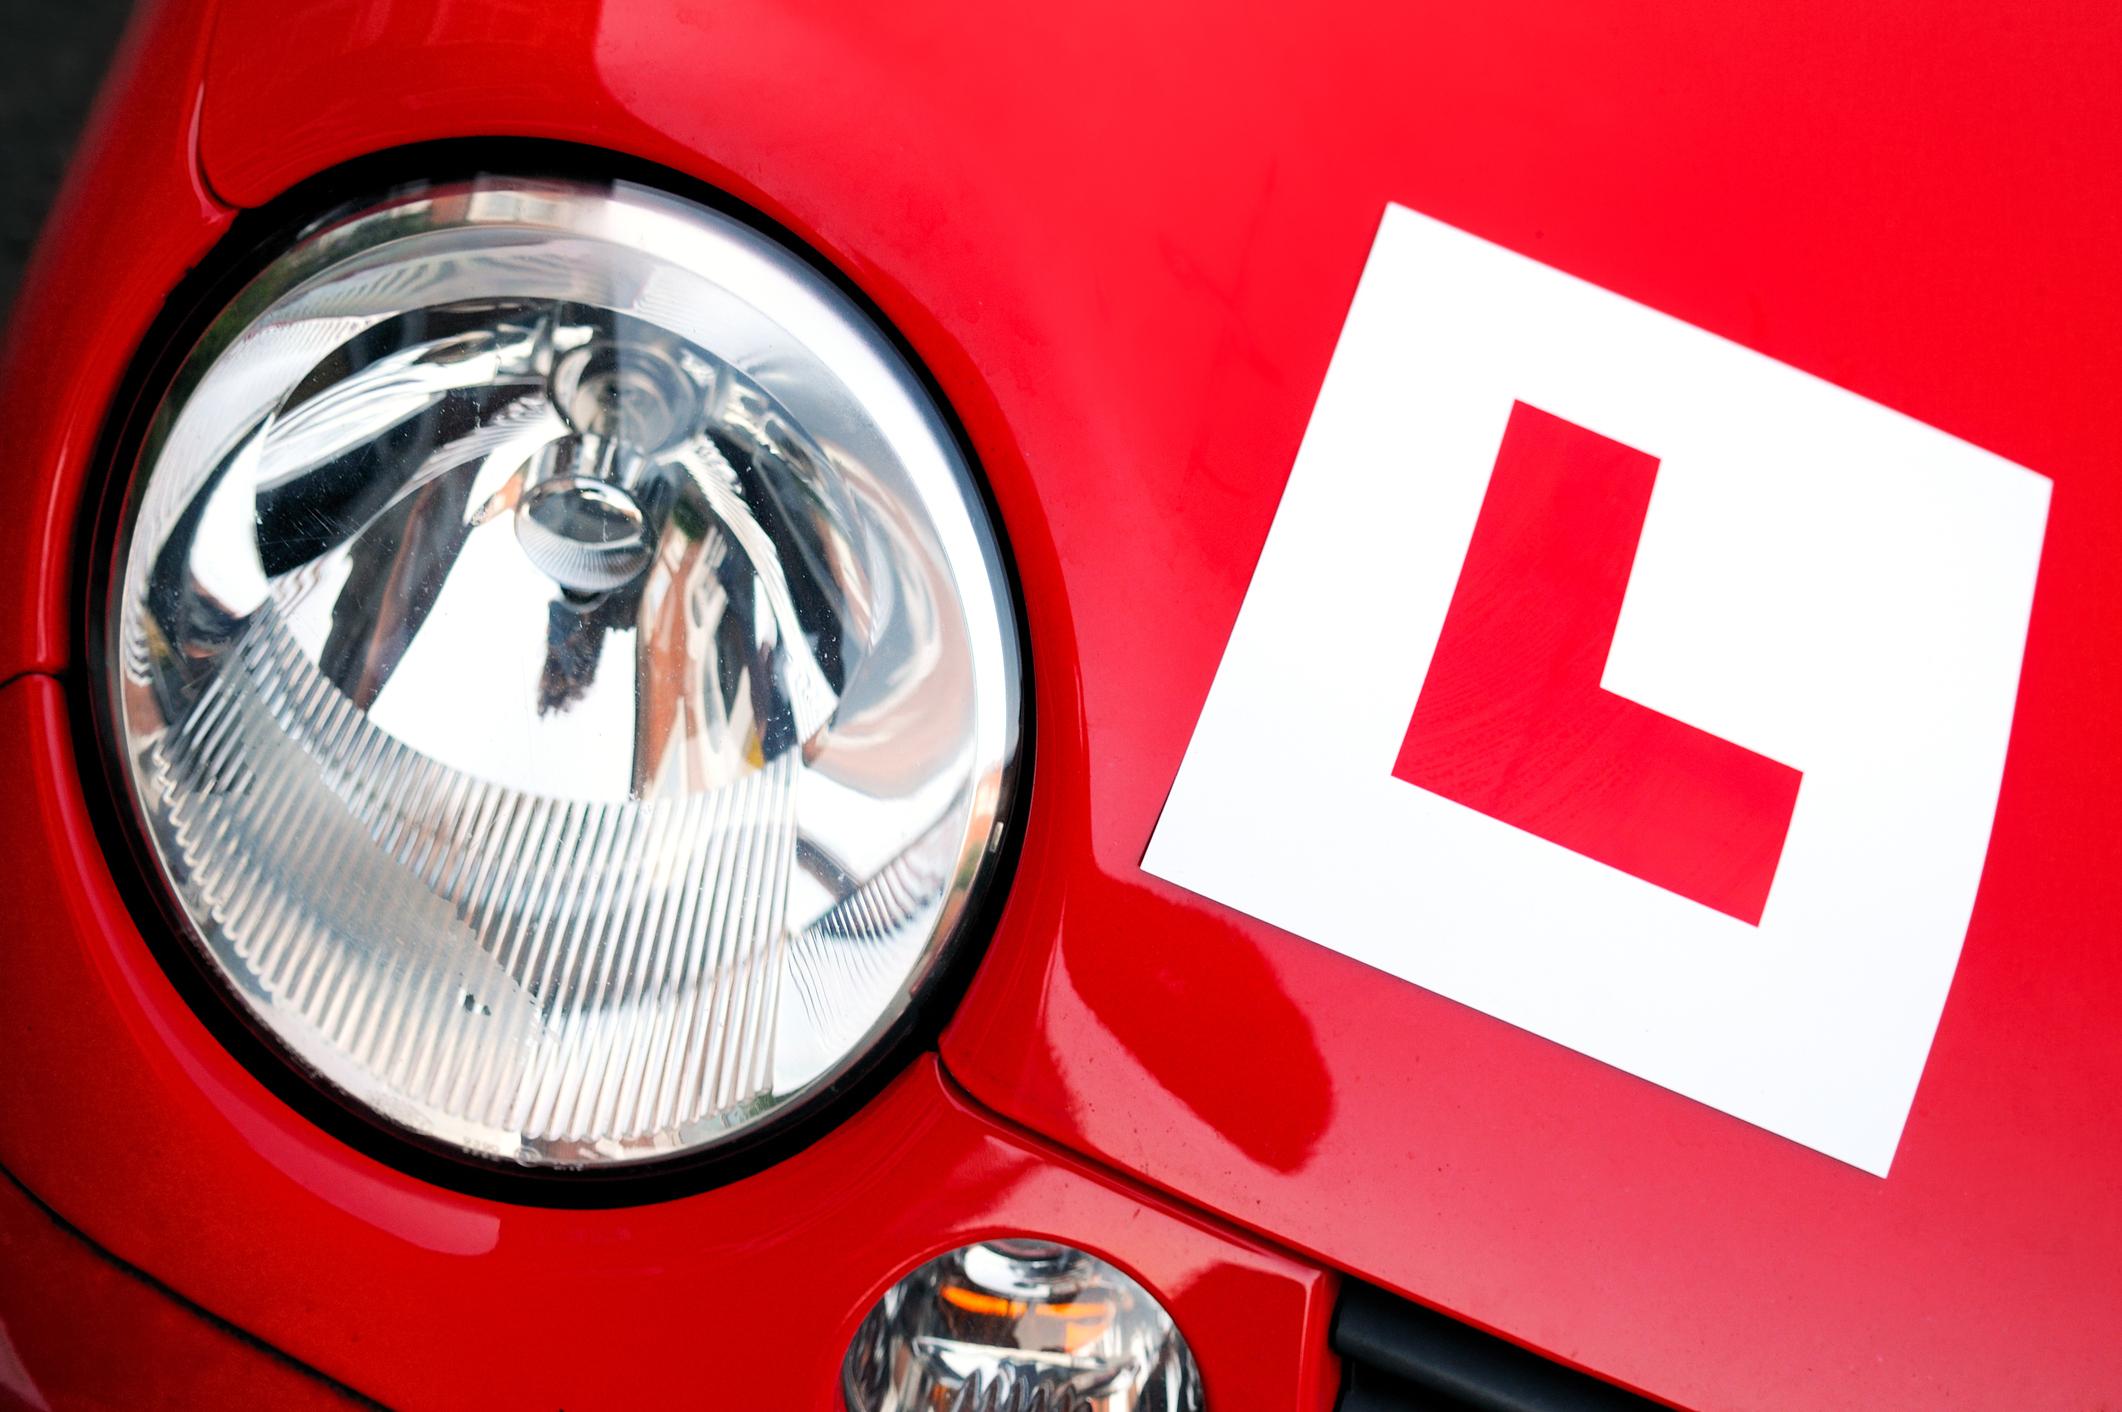 A red 'L' plate on the front of a red Fiat car